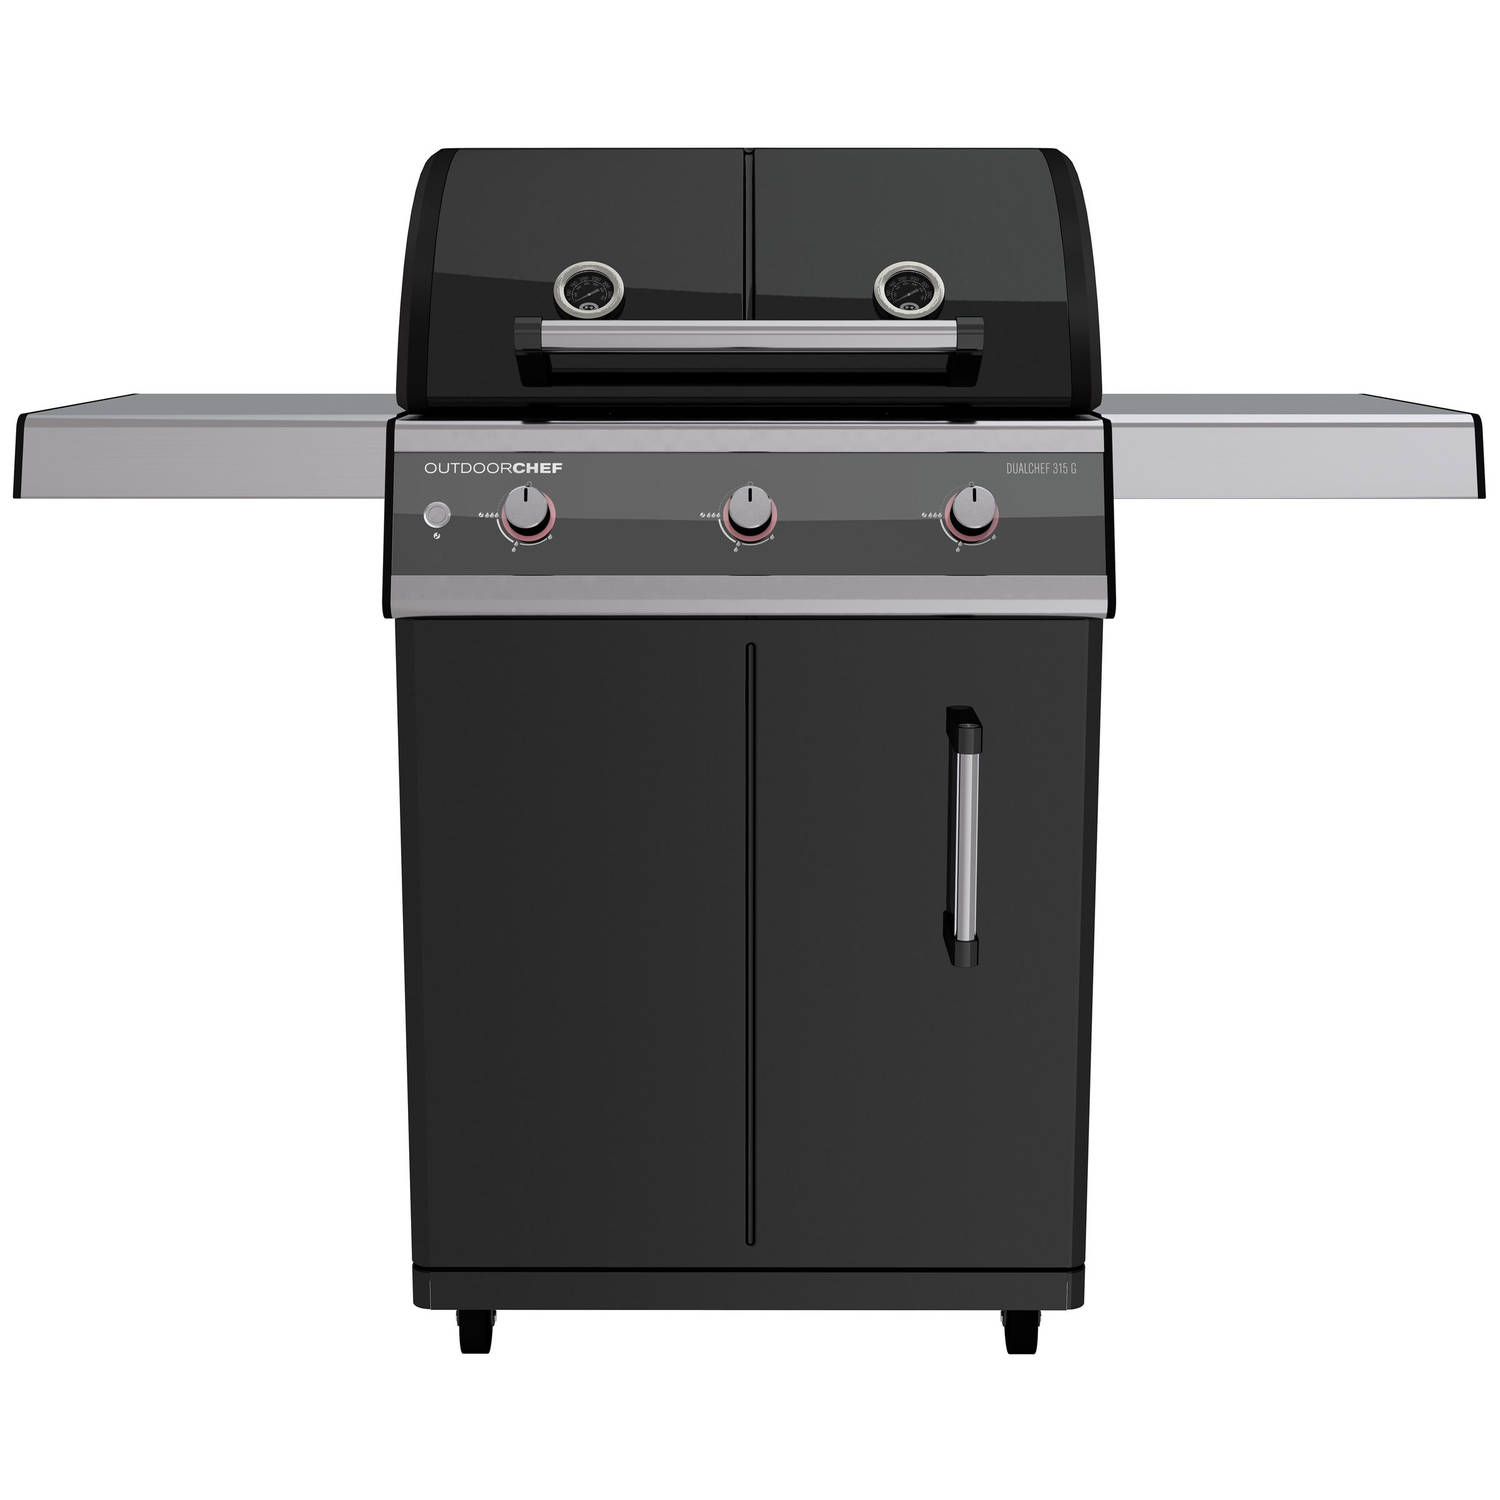 Outdoor Chef Barbecue Gas Dualchef 315 G 30 Mbar